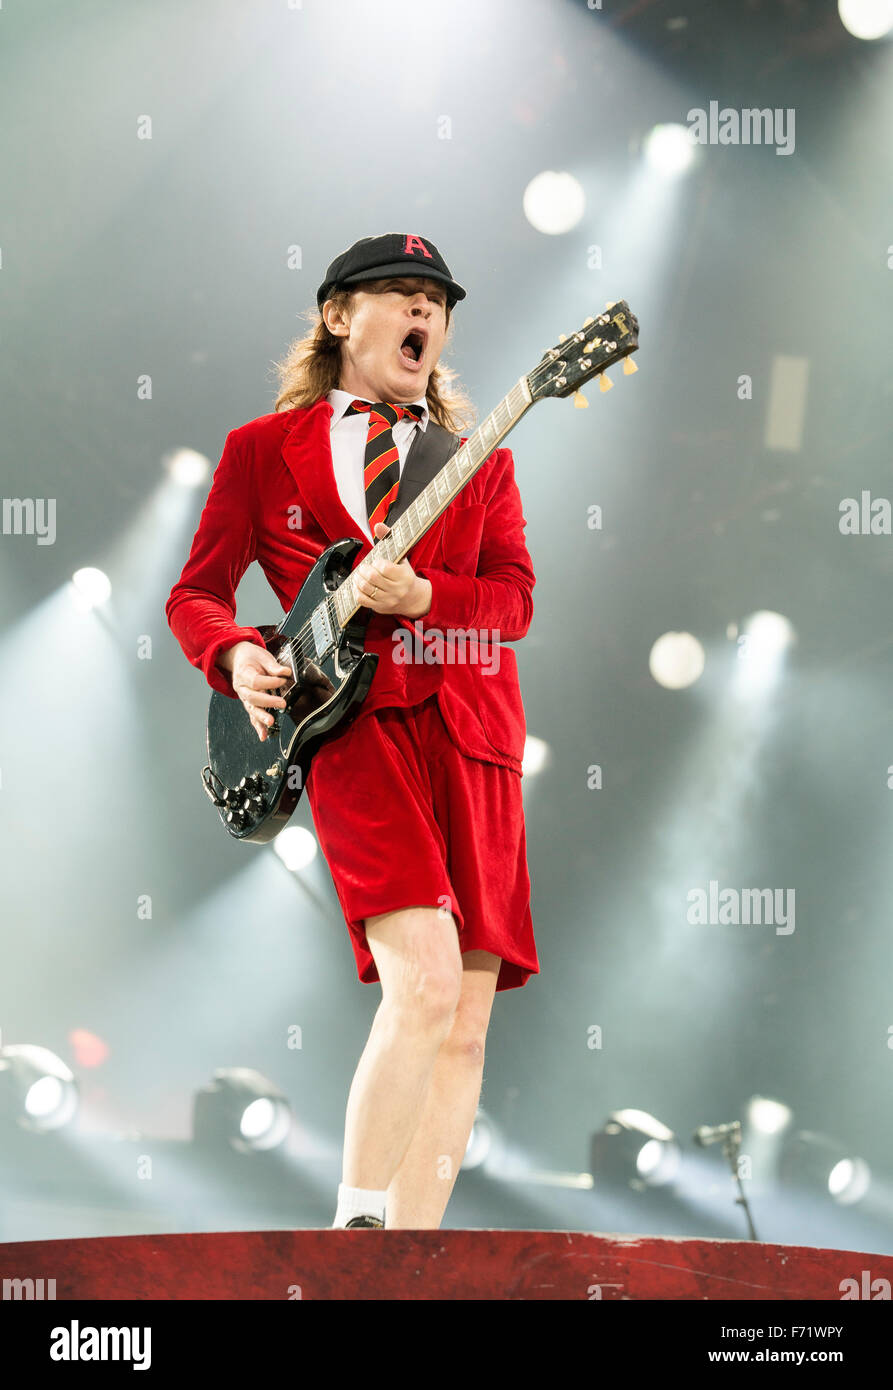 Musician Angus Young of AC/DC performs at Hampden Park National Stadium on June 28, 2015 in Glasgow, United Kingdom Stock Photo